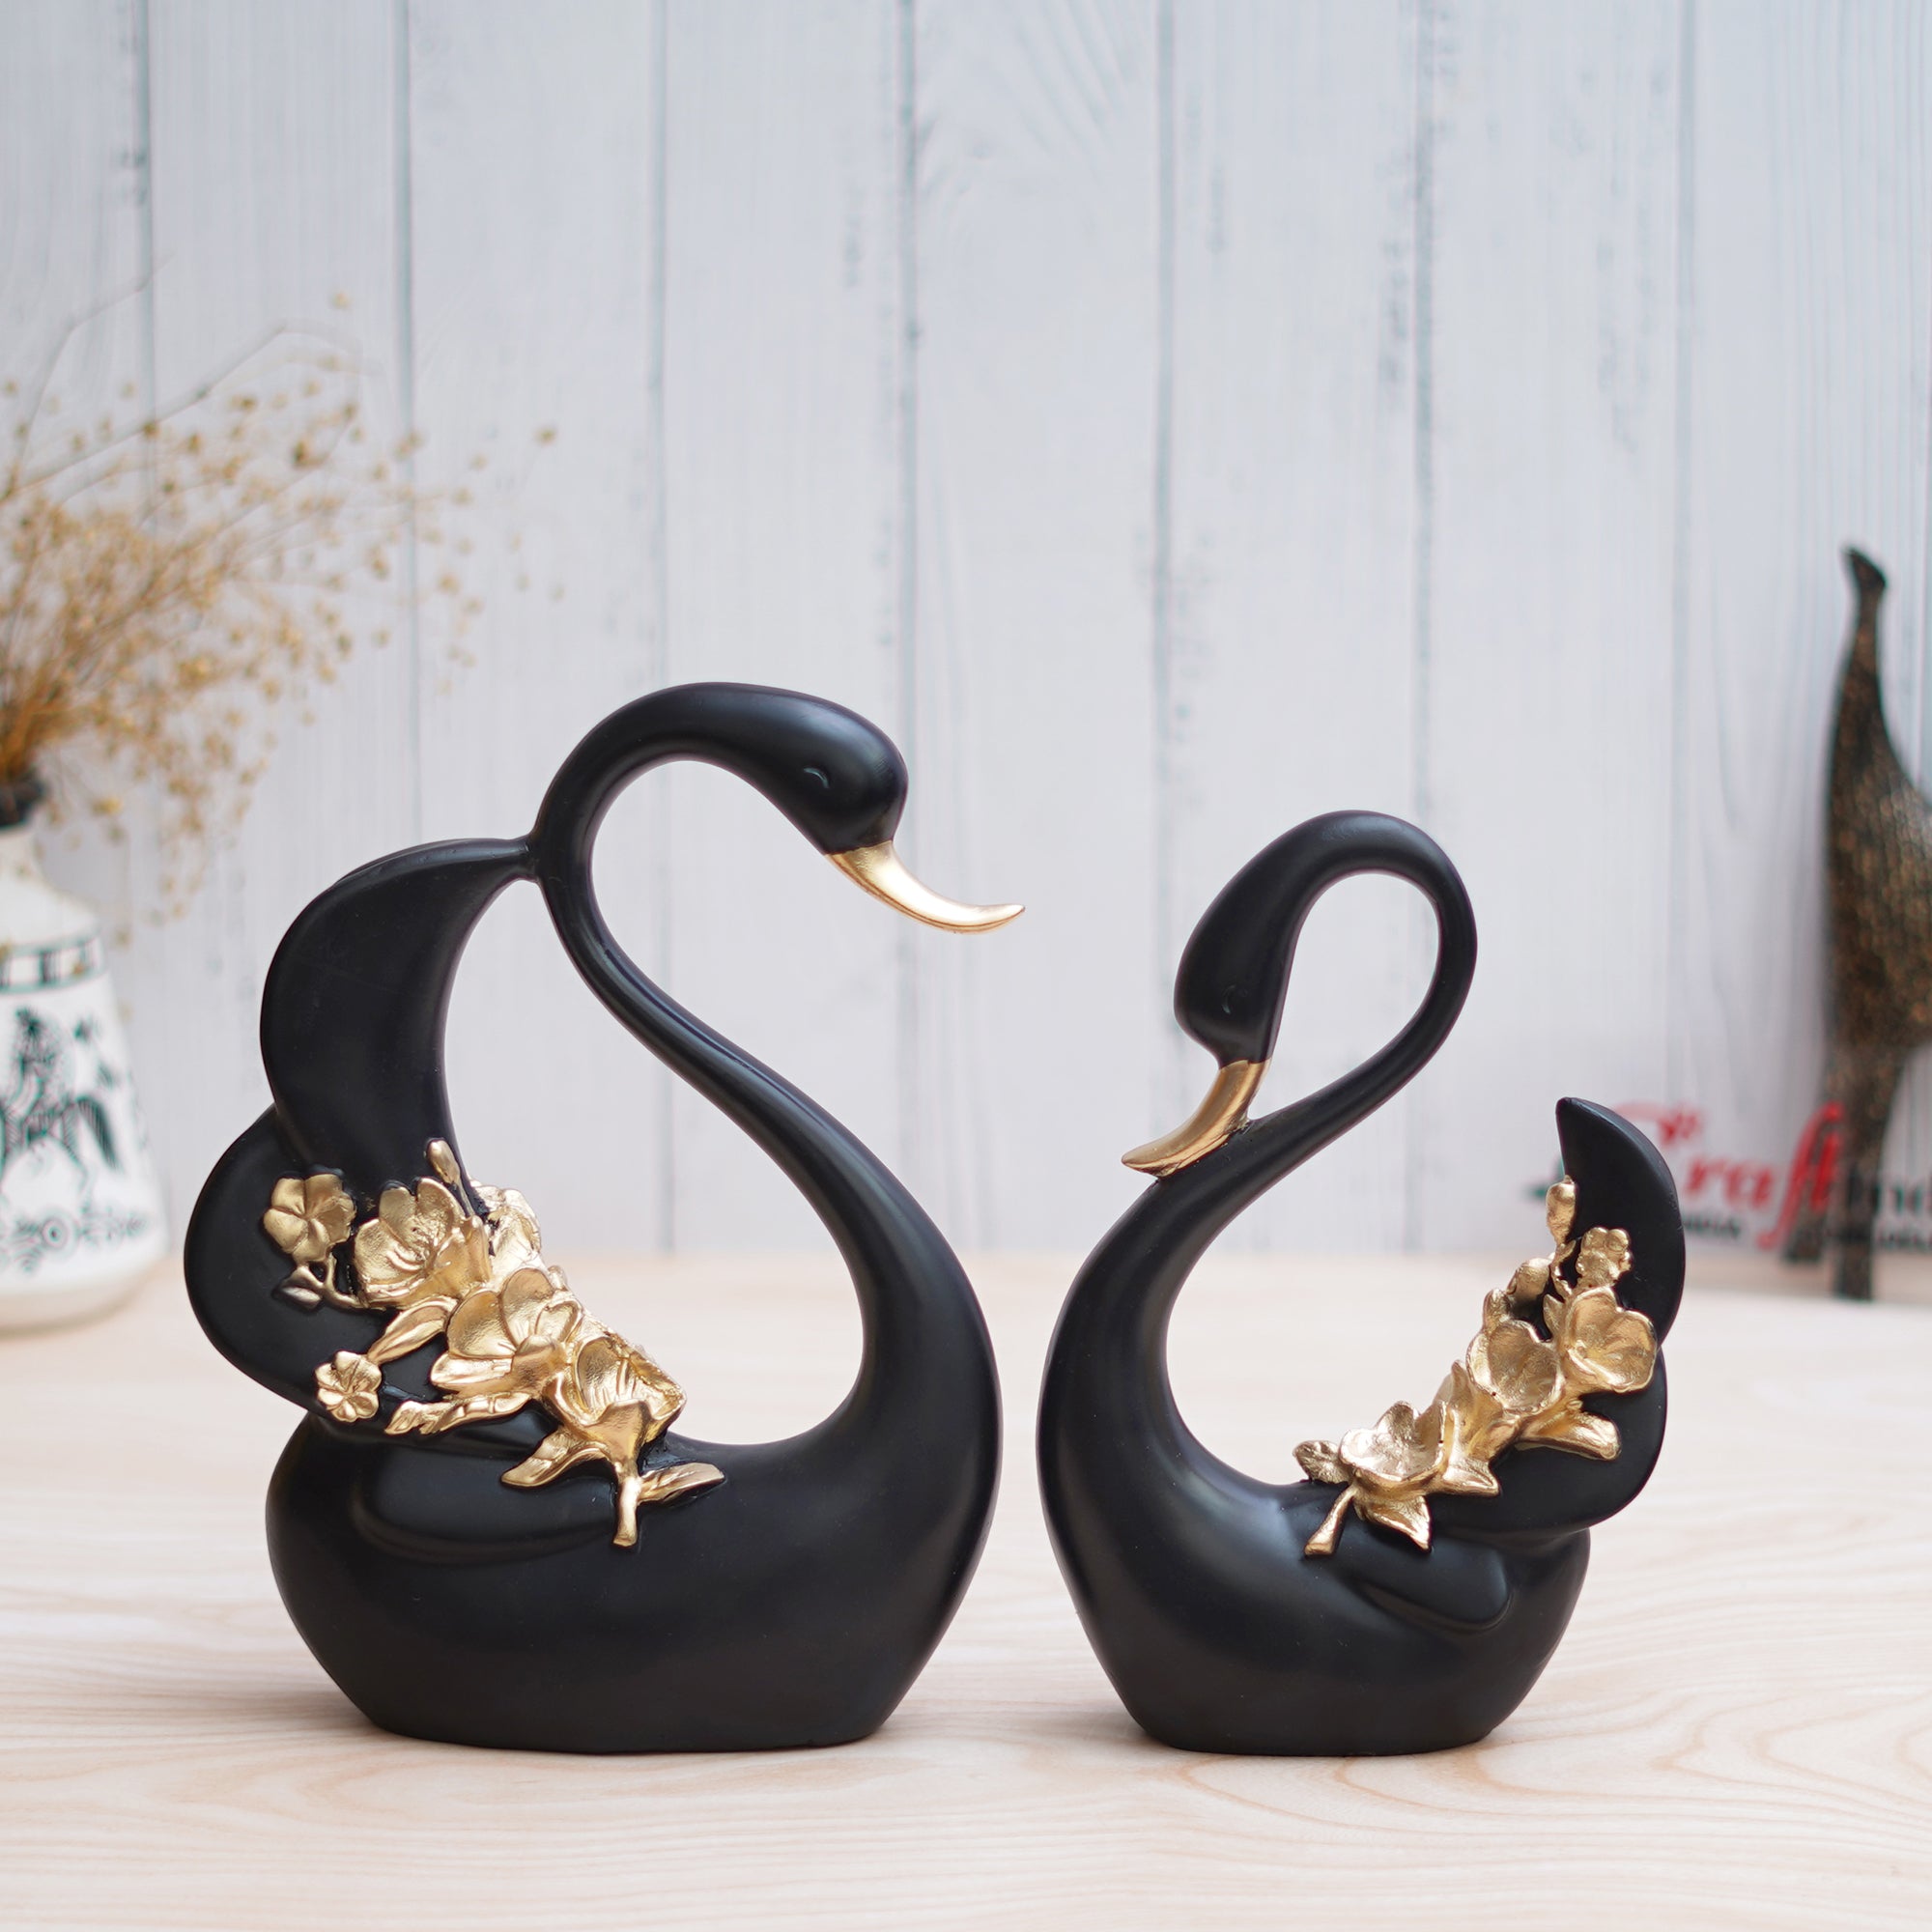 Black and Golden Polyresin Lovely Swan Couple Statue Decorative Showpiece 5